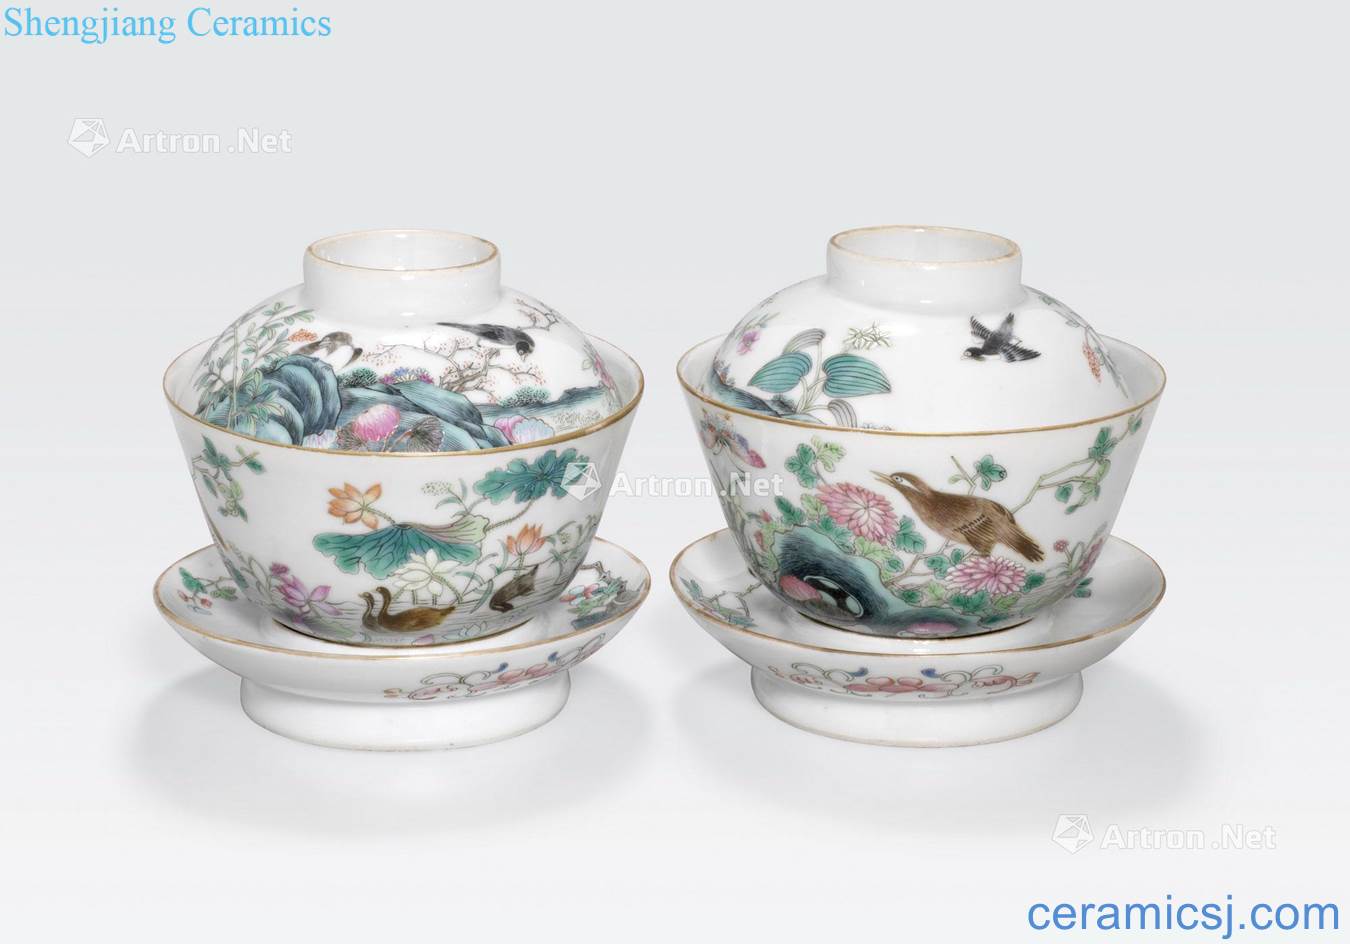 Guangxu marks, the Republic period A PAIR OF FAMILLE ROSE ENAMELED TEACUPS WITH STANDS AND LIDS